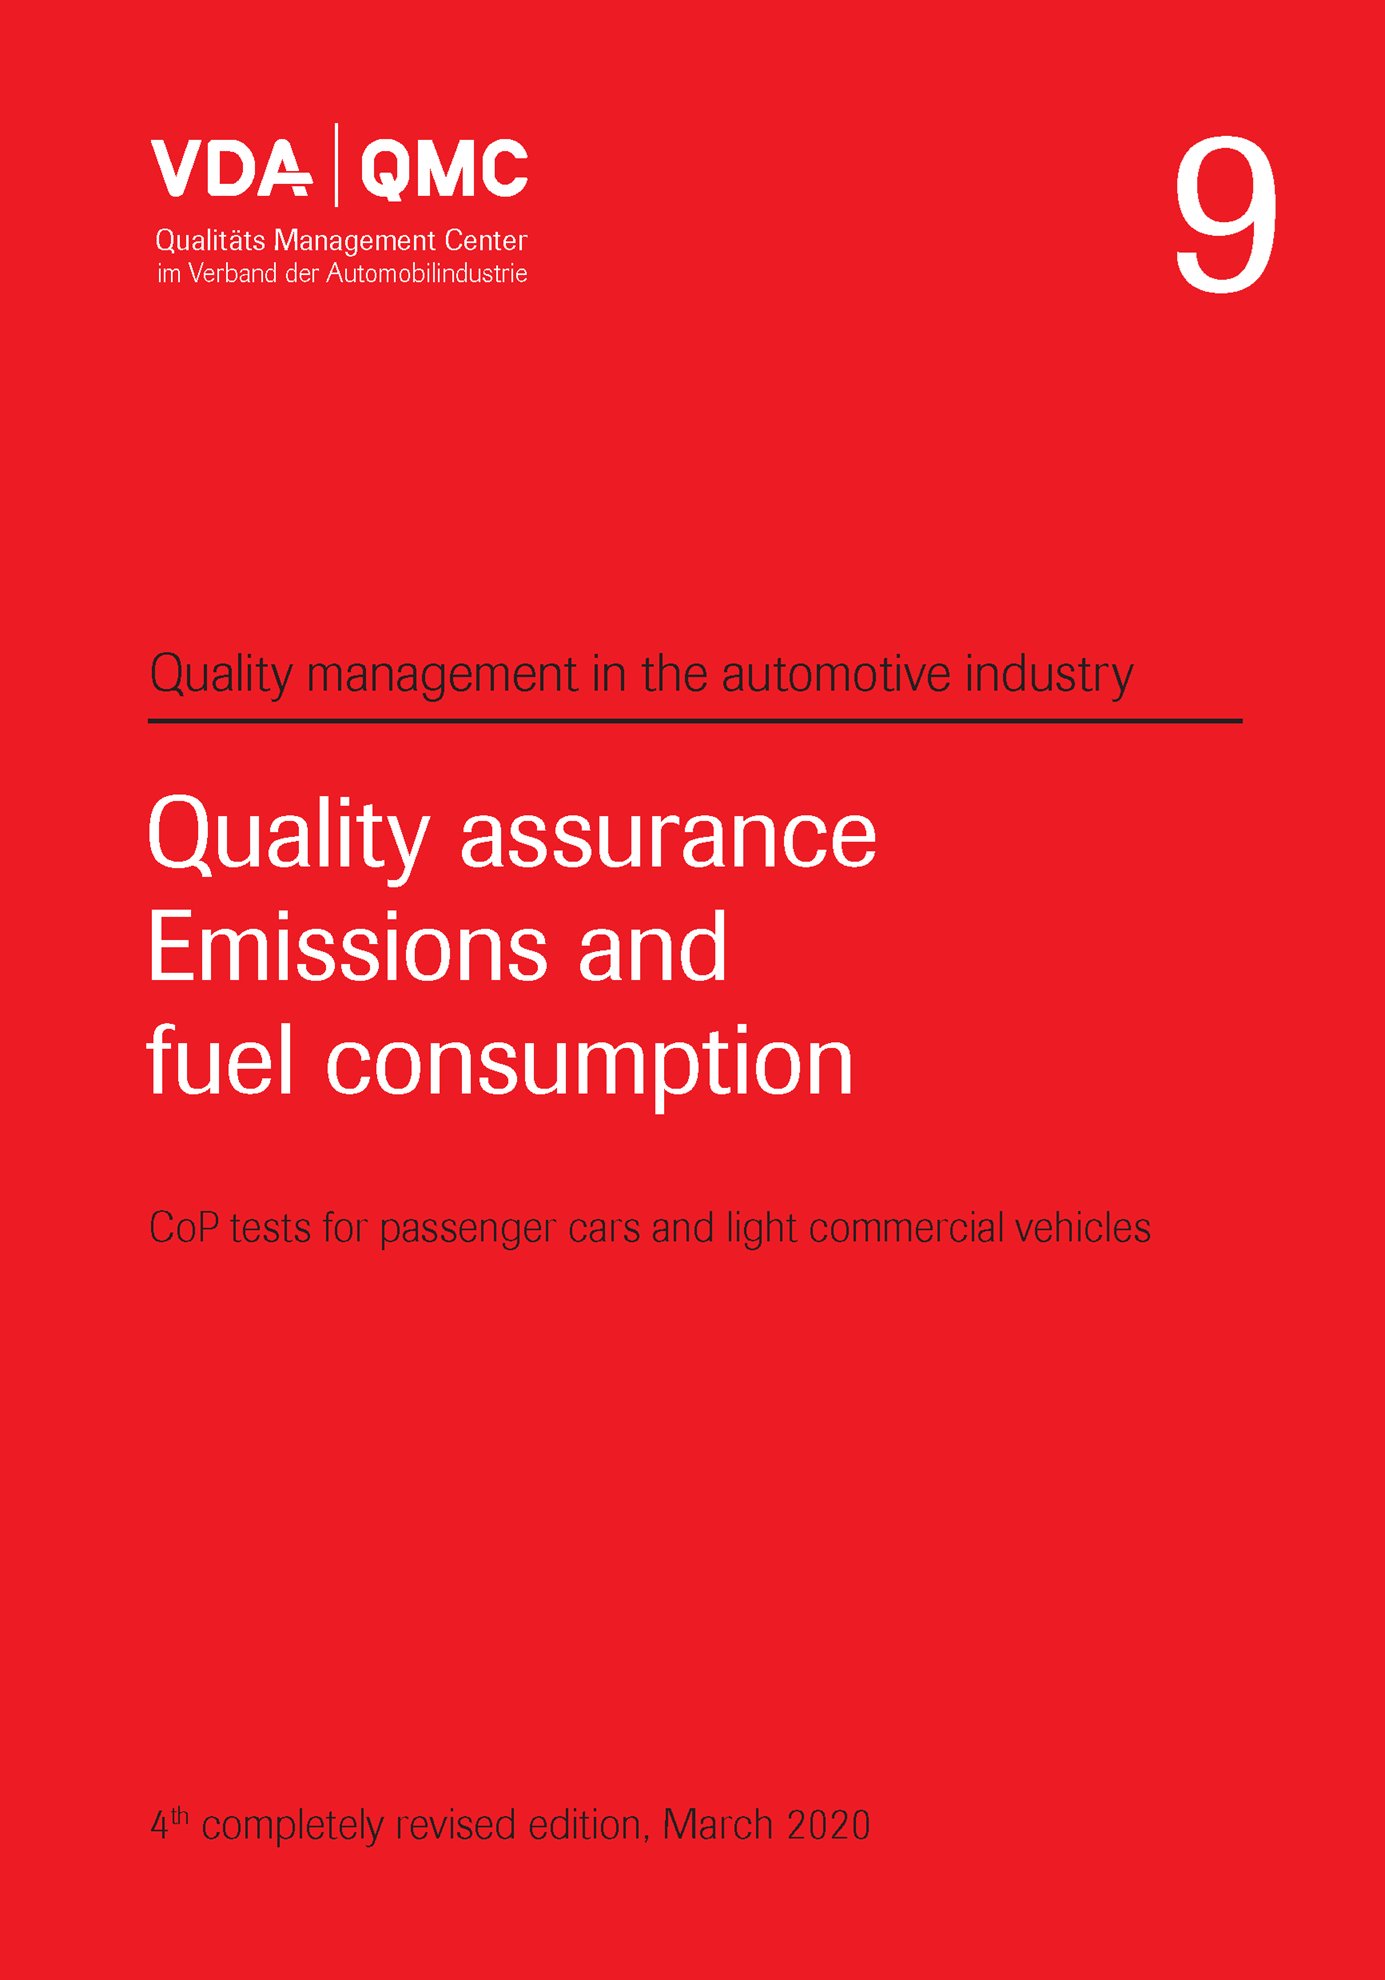 Publikace  VDA Volume 9
 Quality Assurance
 Emissions and Fuel Consumption
 CoP tests on passenger cars and light commercial vehicles, 4th, completely revised edition, March 2020 1.3.2020 náhled